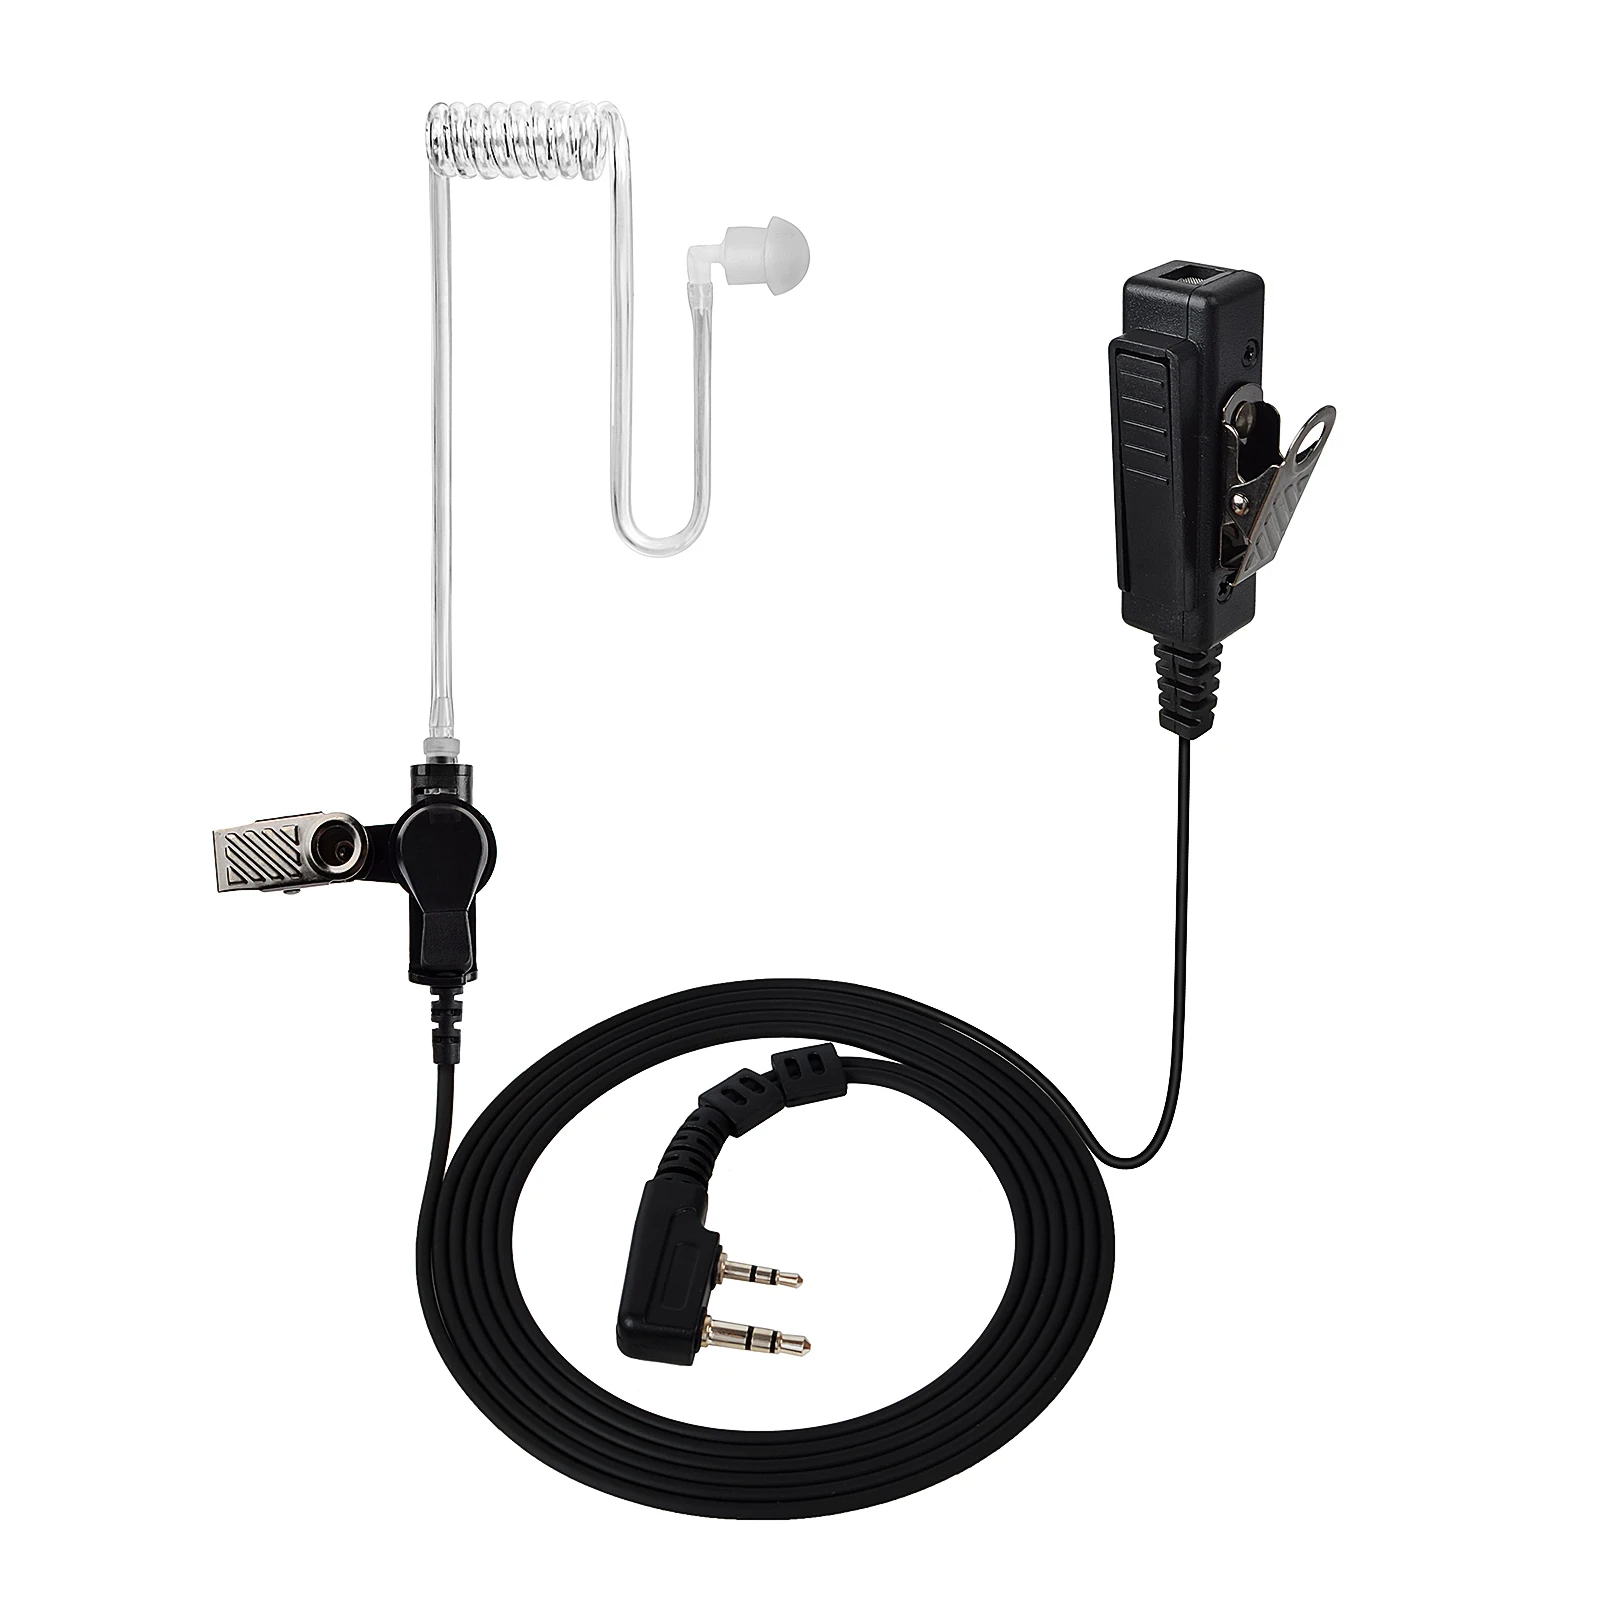 Acoustic Air Tube Earpiece Em-450453 with Big Round Ptt for Coach - China  Clear Tube Earpiece and Surveillance Kits Clear Air Tube Earpiec price